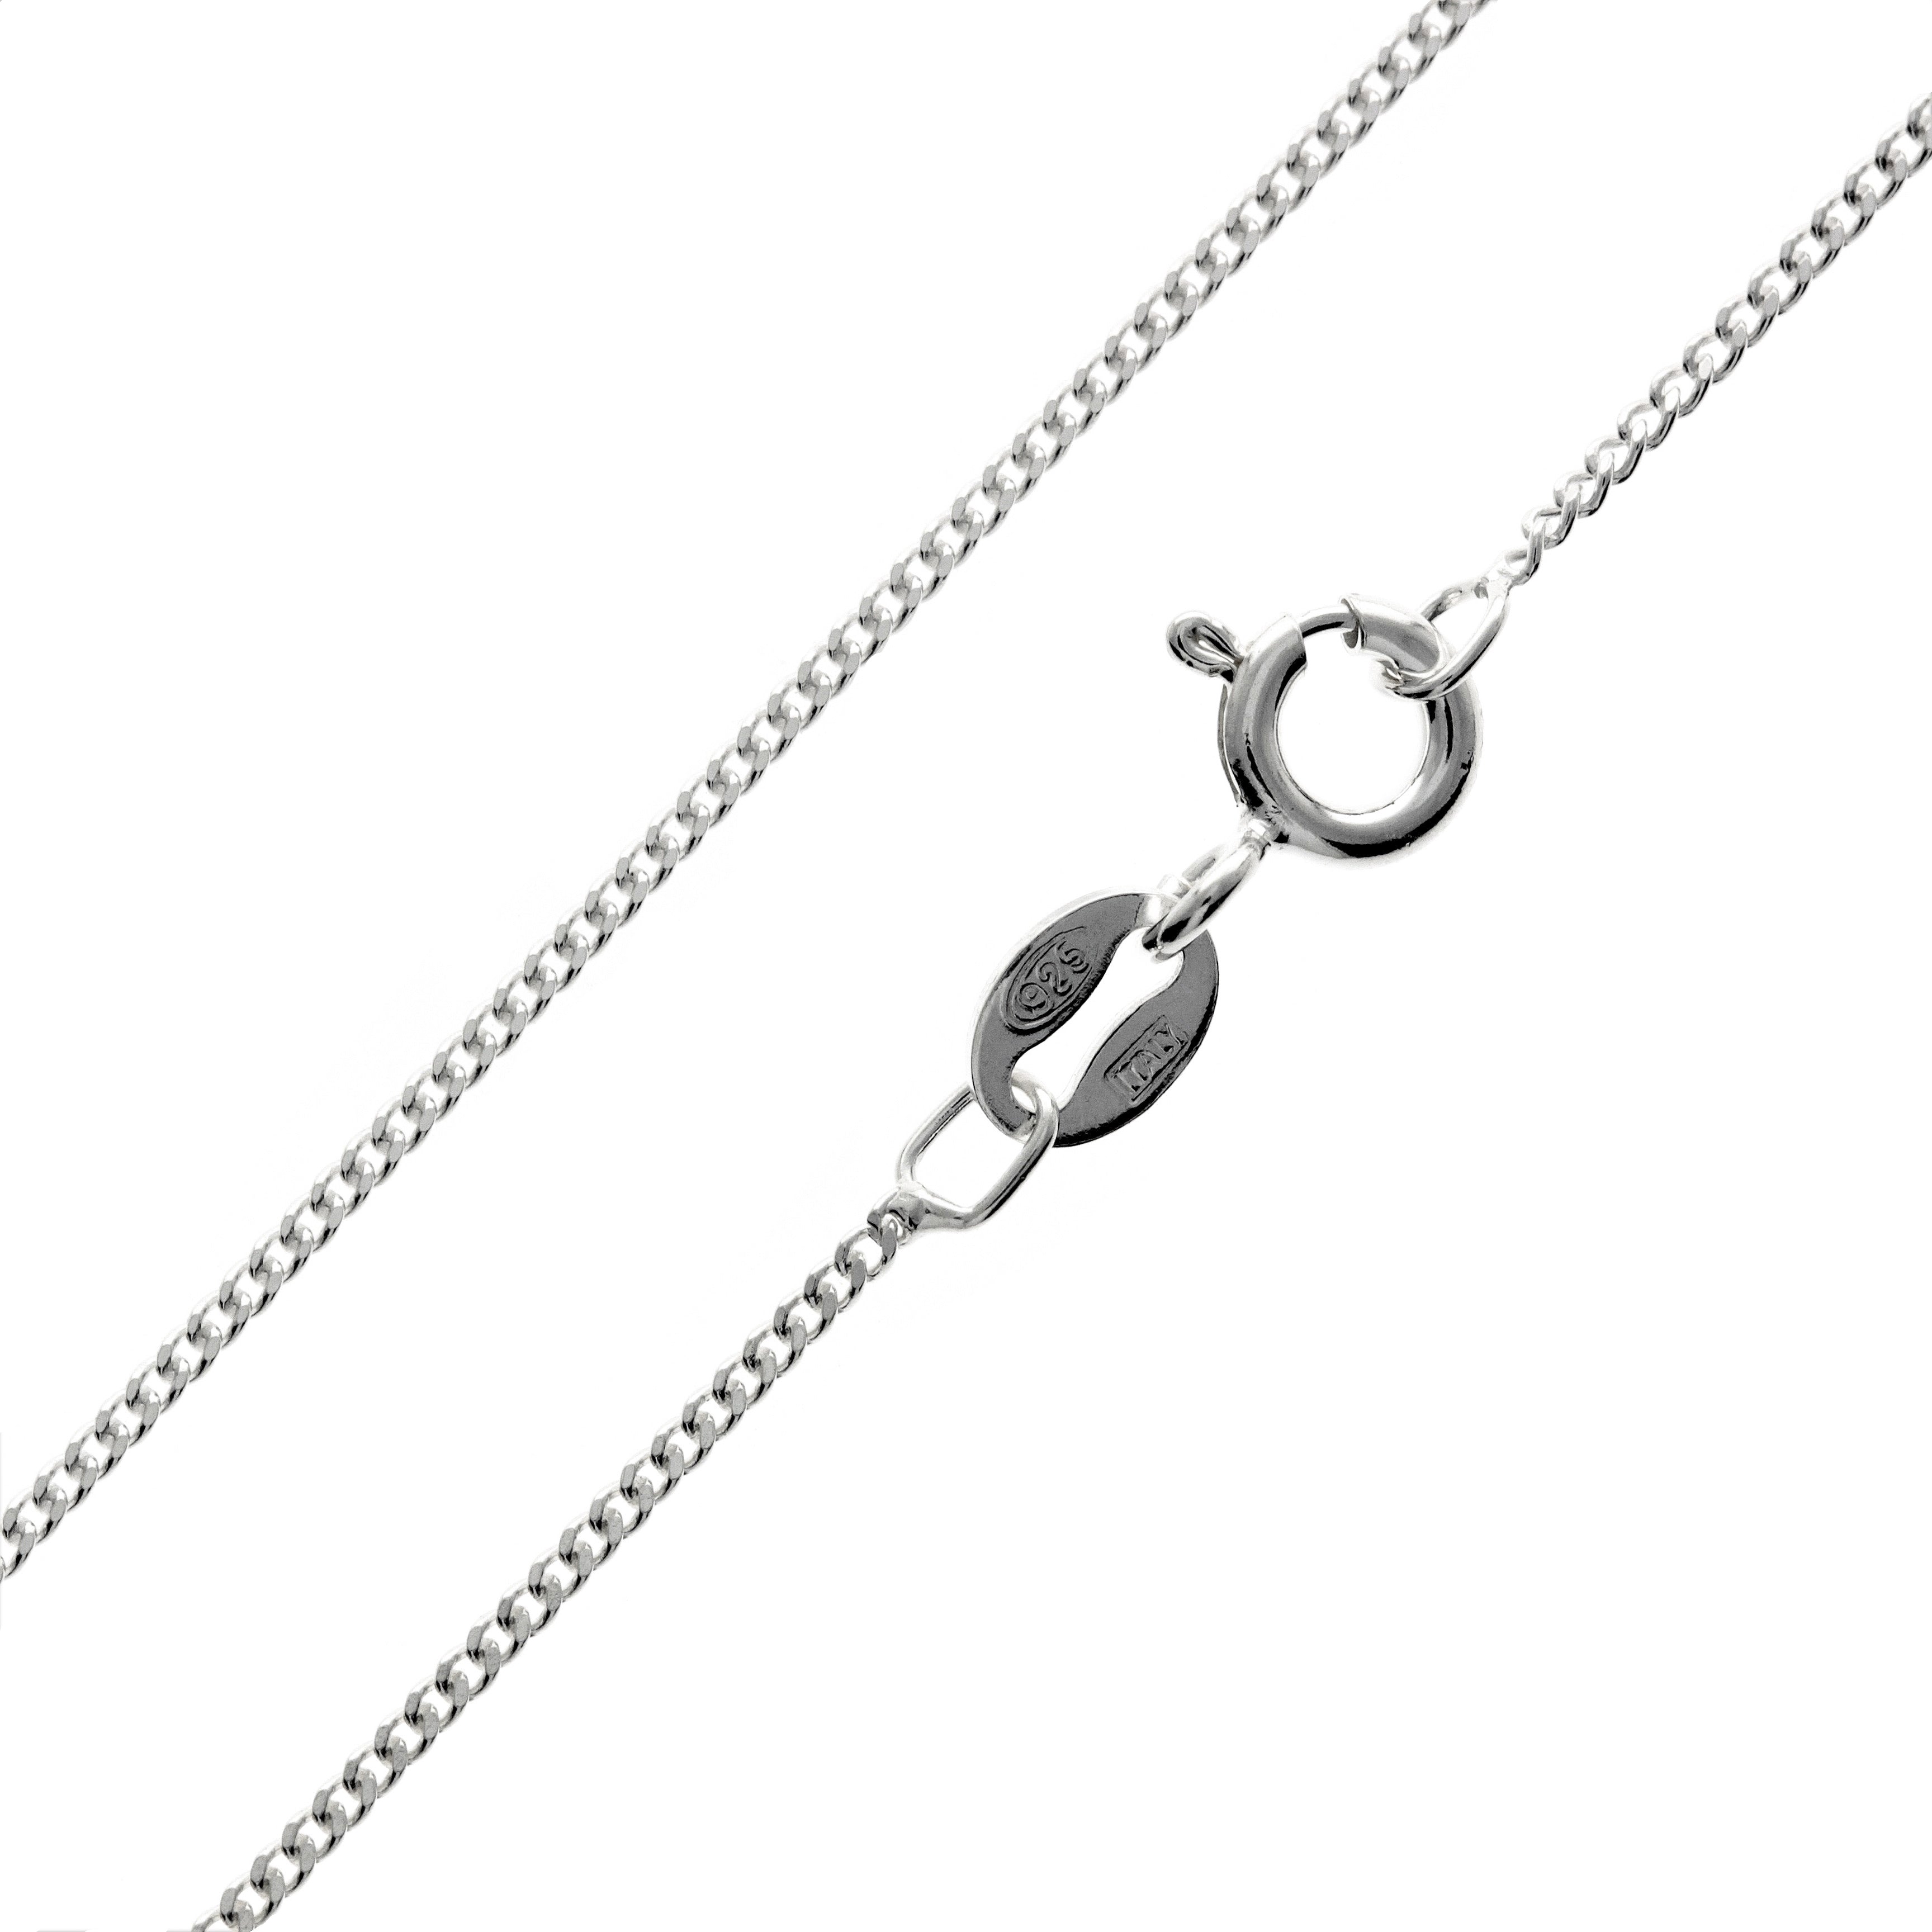 Made in Italy - 925 Sterling Silver Delicate Diamond Cut 1.1 mm chain - GCH009